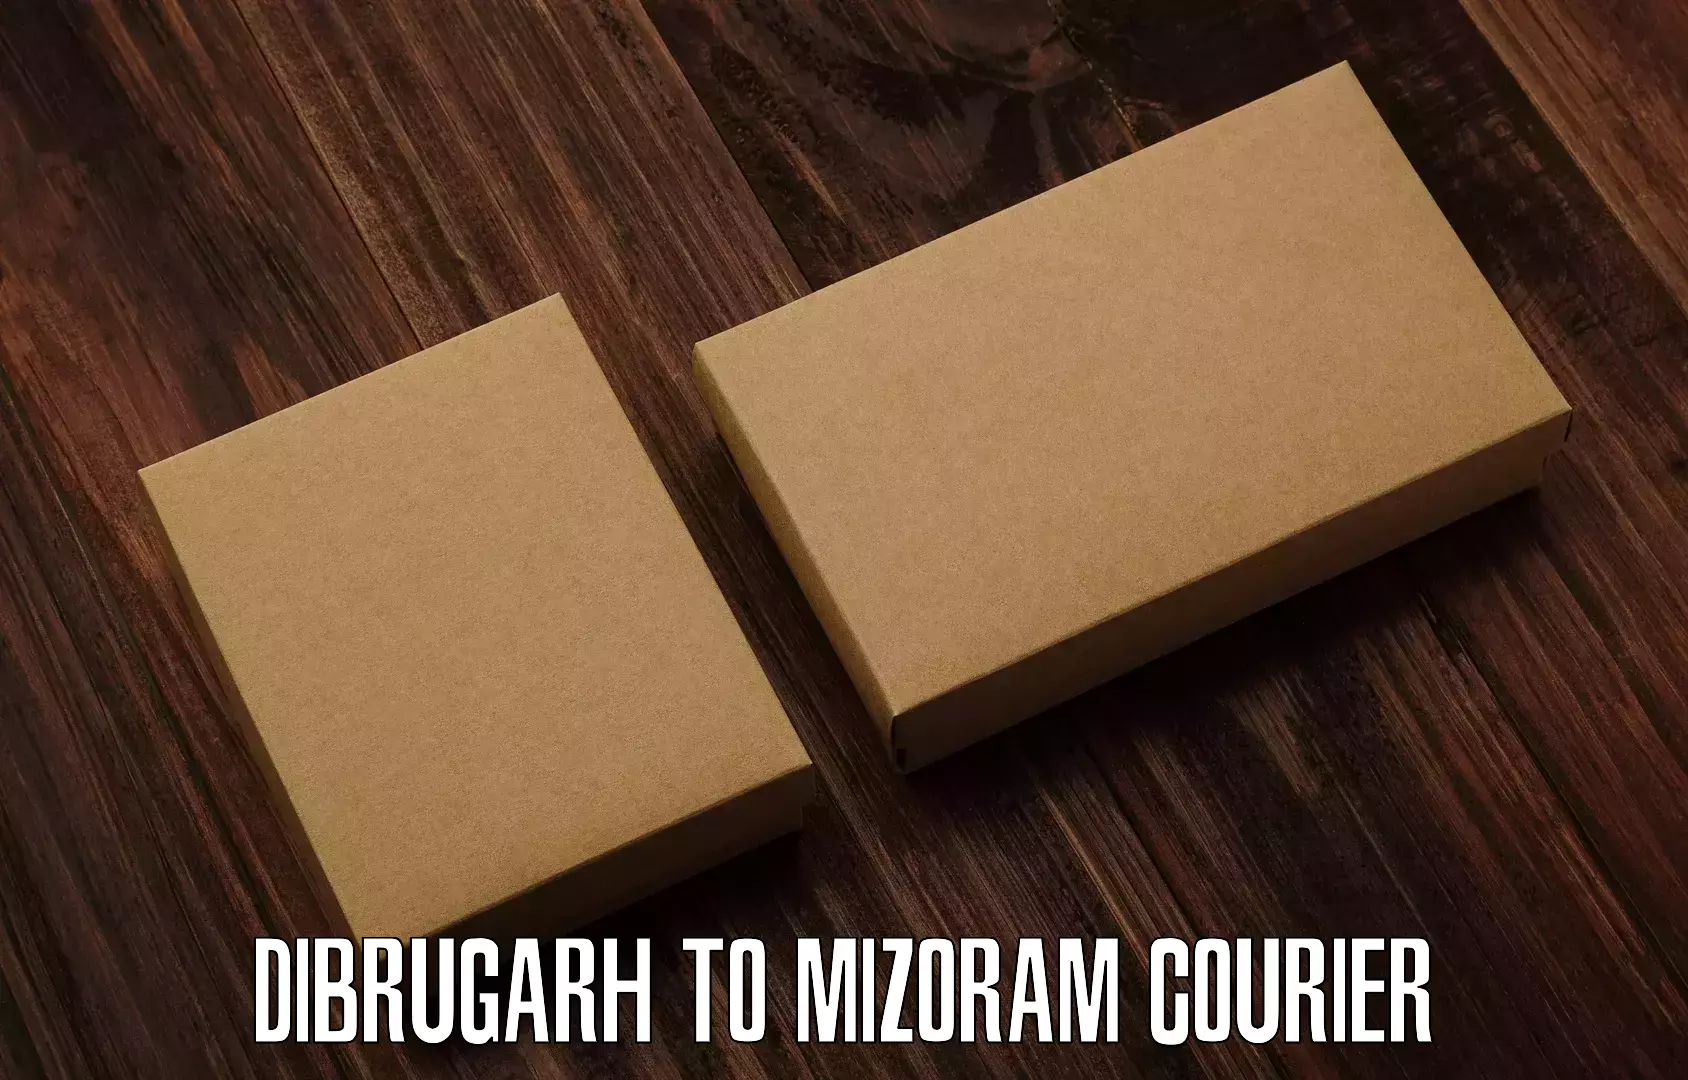 Postal and courier services Dibrugarh to Mizoram